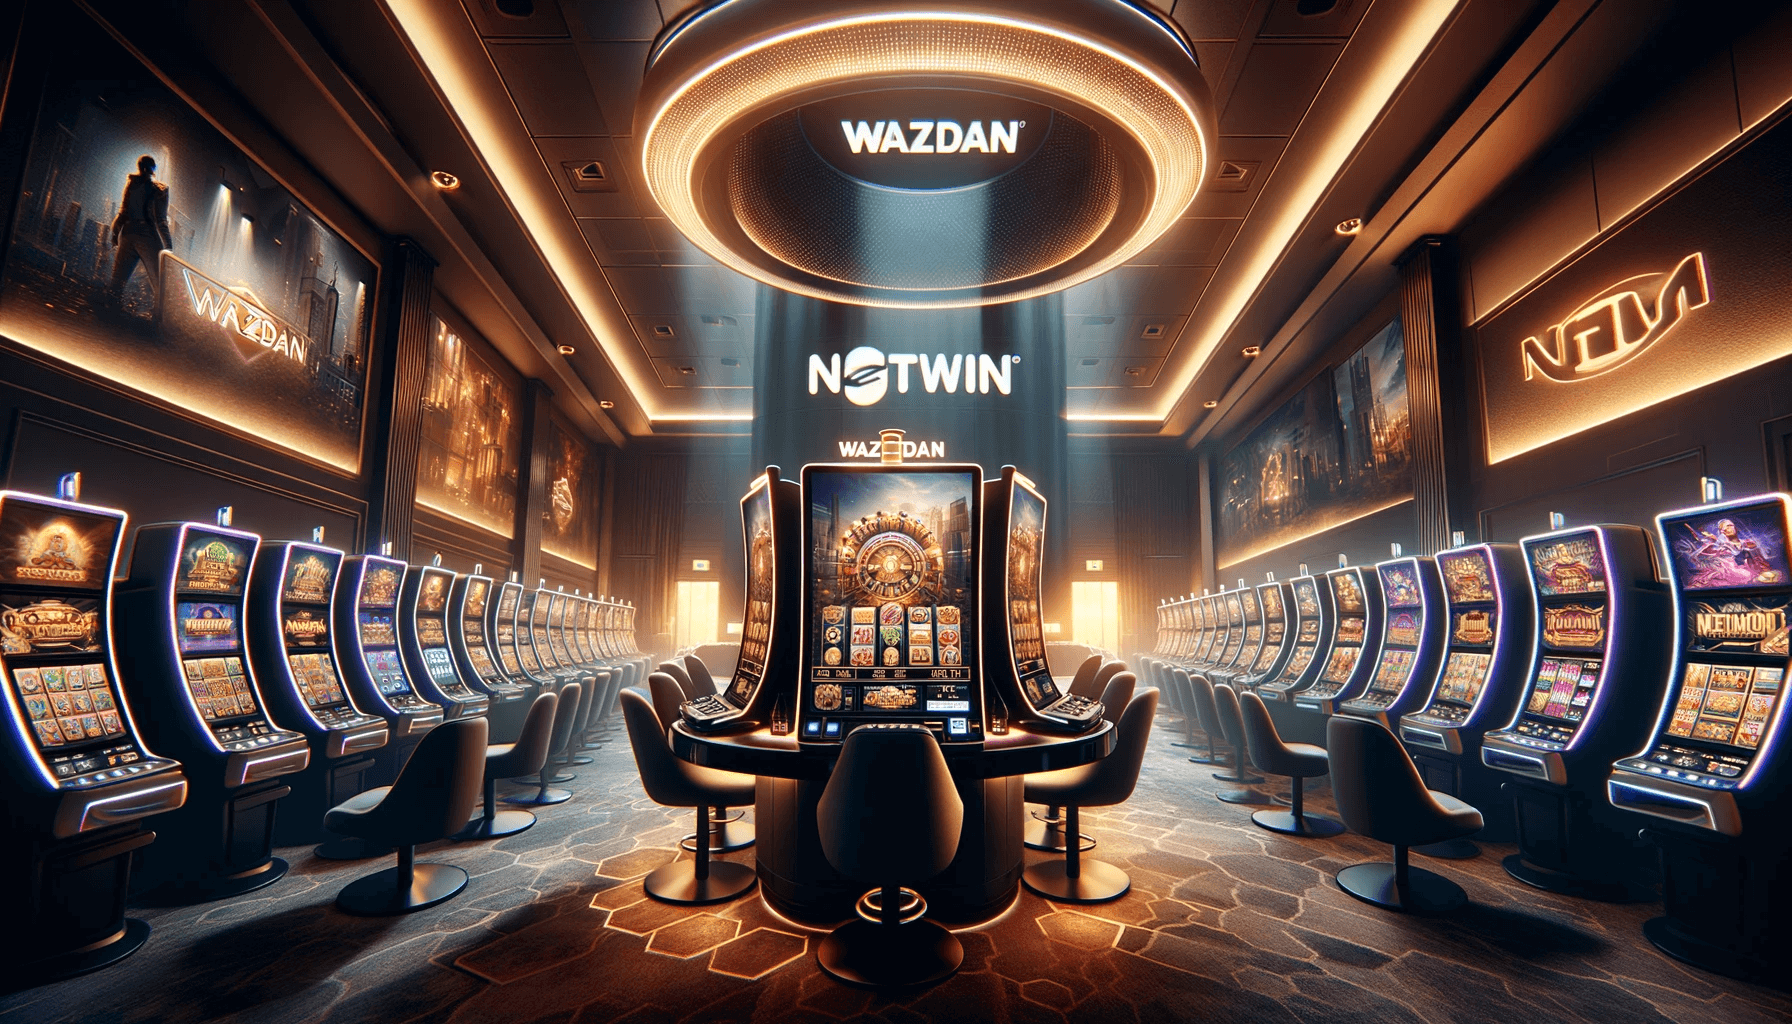 Wazdan & Netwin Partnership: Boost in Italy’s iGaming Image